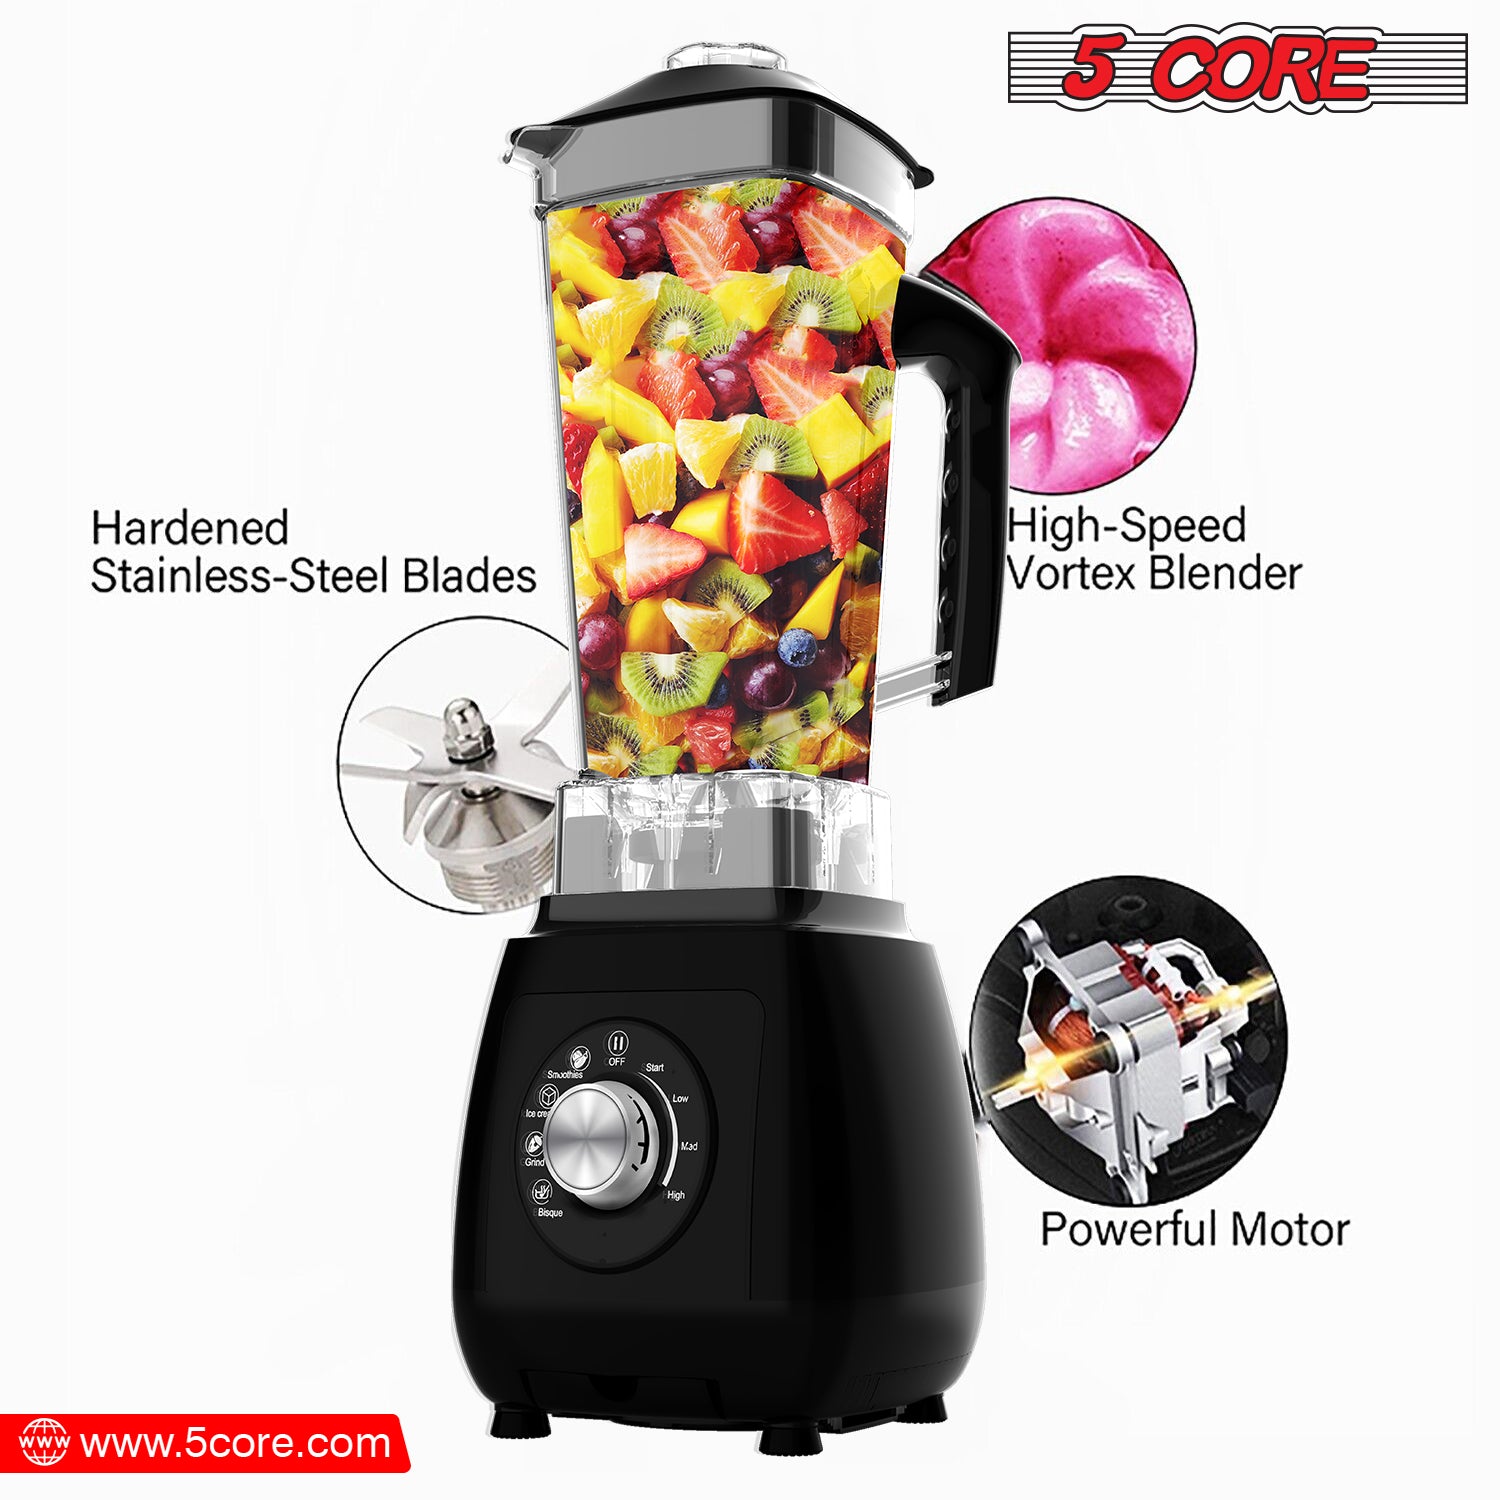 5 Core Personal Blender 68 Oz Capacity With Travel Mug Multipurpose Blender Food Processor Combo Blenders For Smoothies Juices Baby Food -JB 2000 M